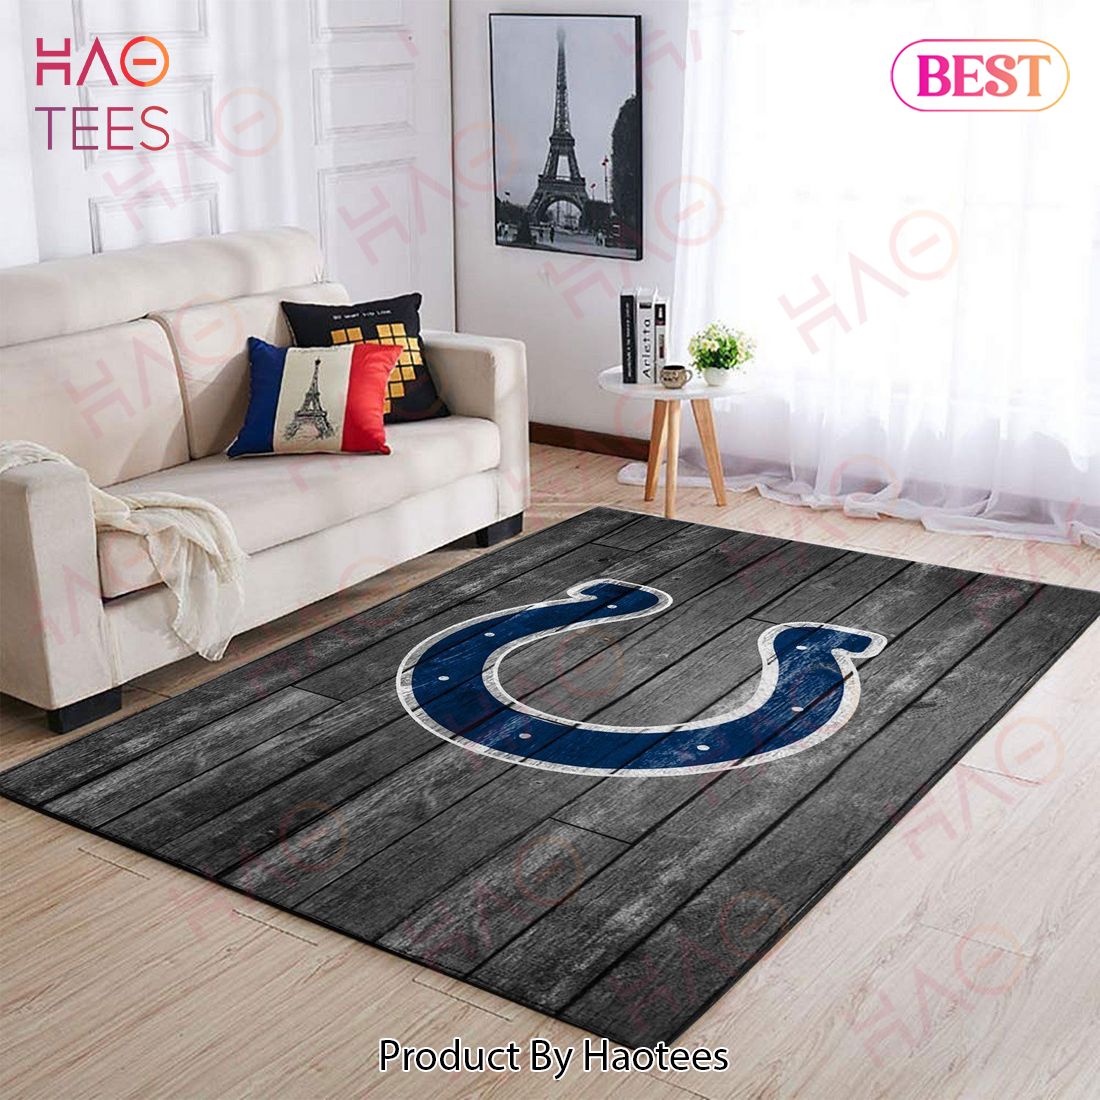 Indianapolis Colts Nfl Team Logo Grey Area Rugs Wooden Style Living Room Carpet Sports Rug Regtangle Carpet Floor Decor Home Decor